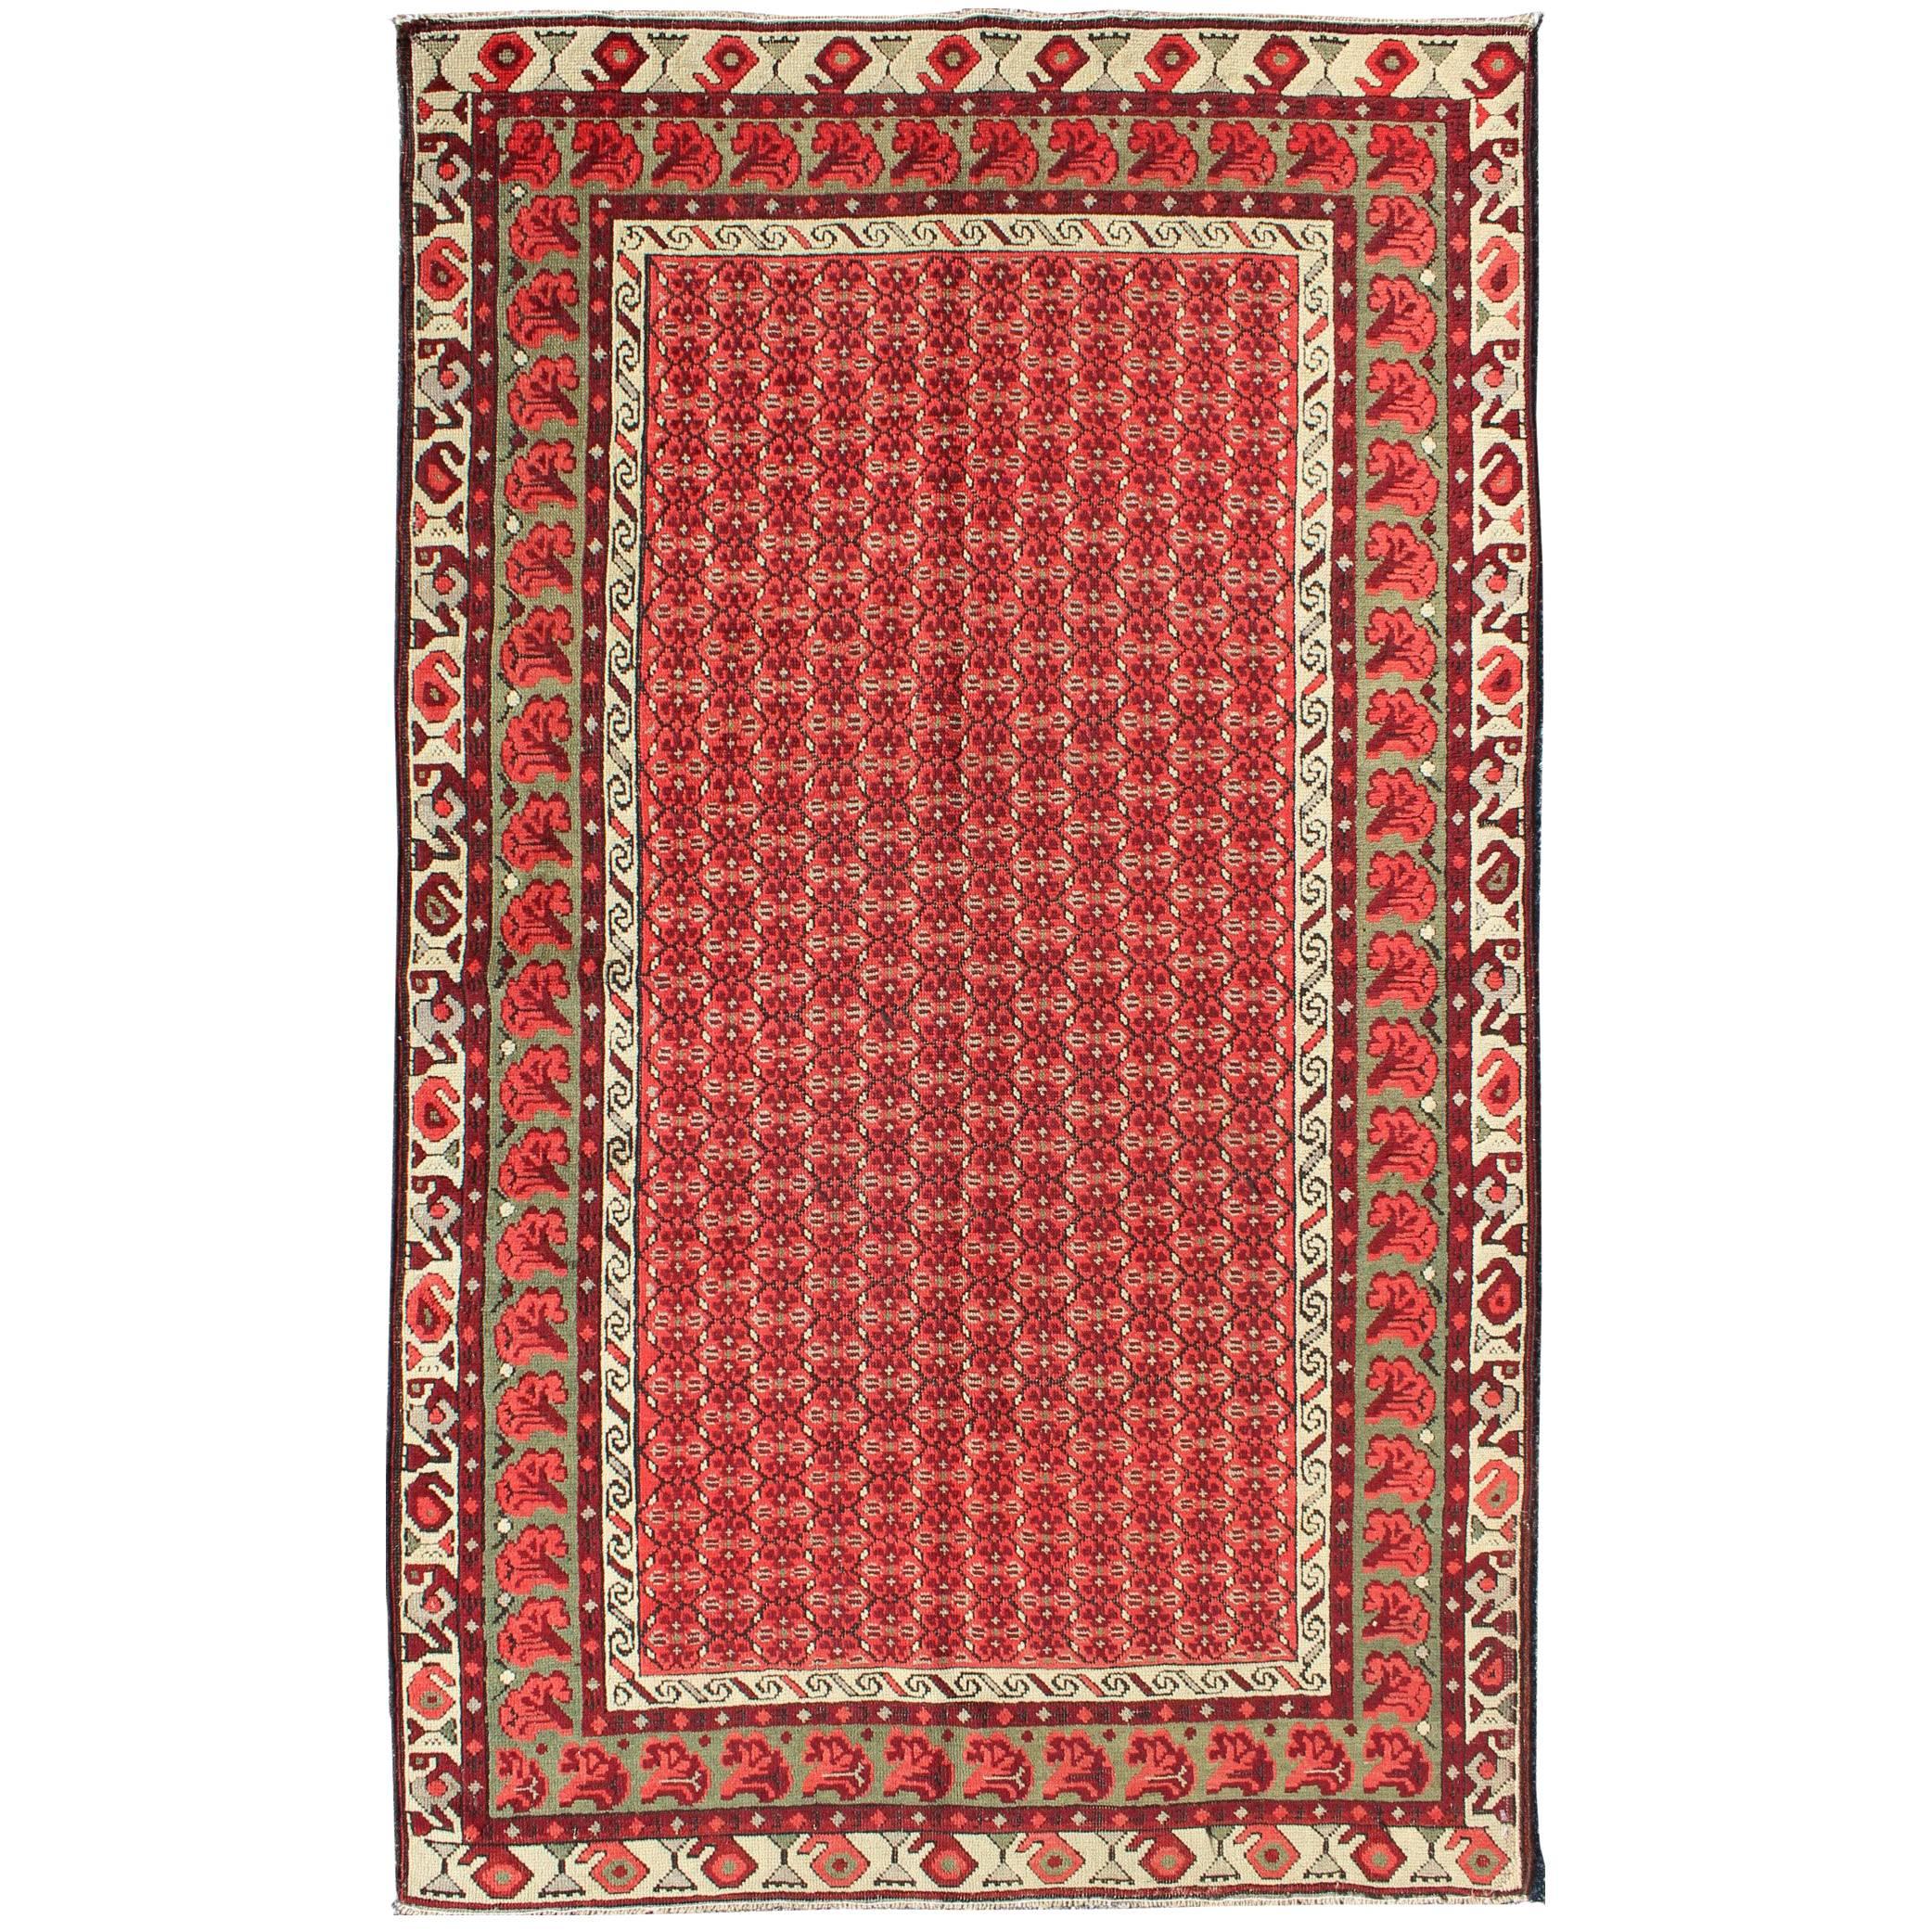 All-Over Design Antique Karabagh Rug with Tribal Motifs in Green and Red